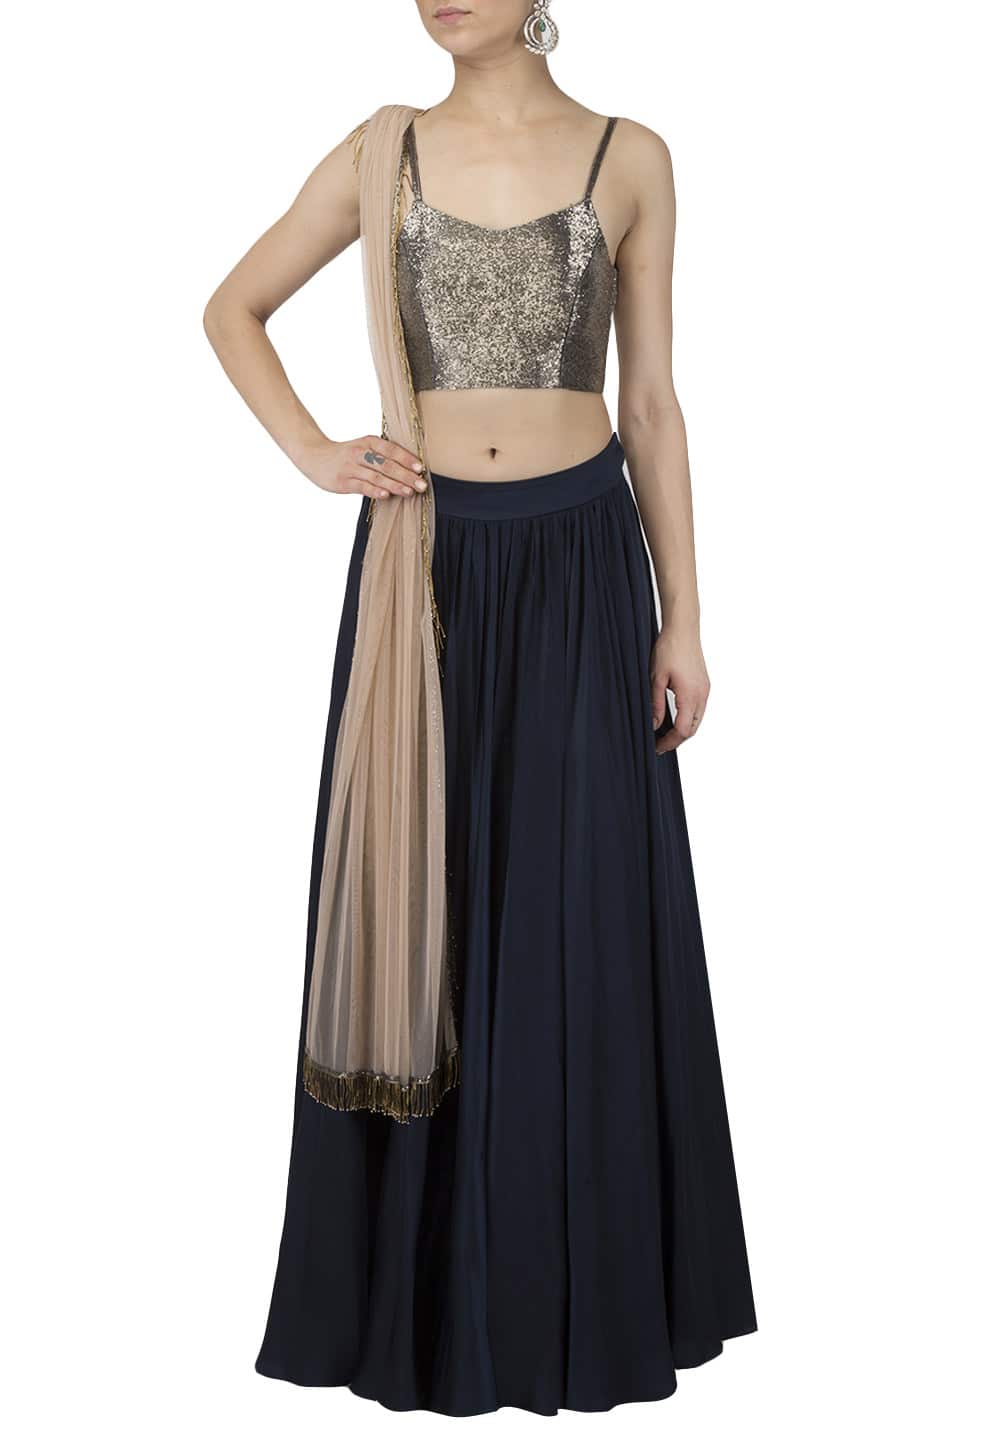 Midnight blue lehenga with silver cutdana blouse set available